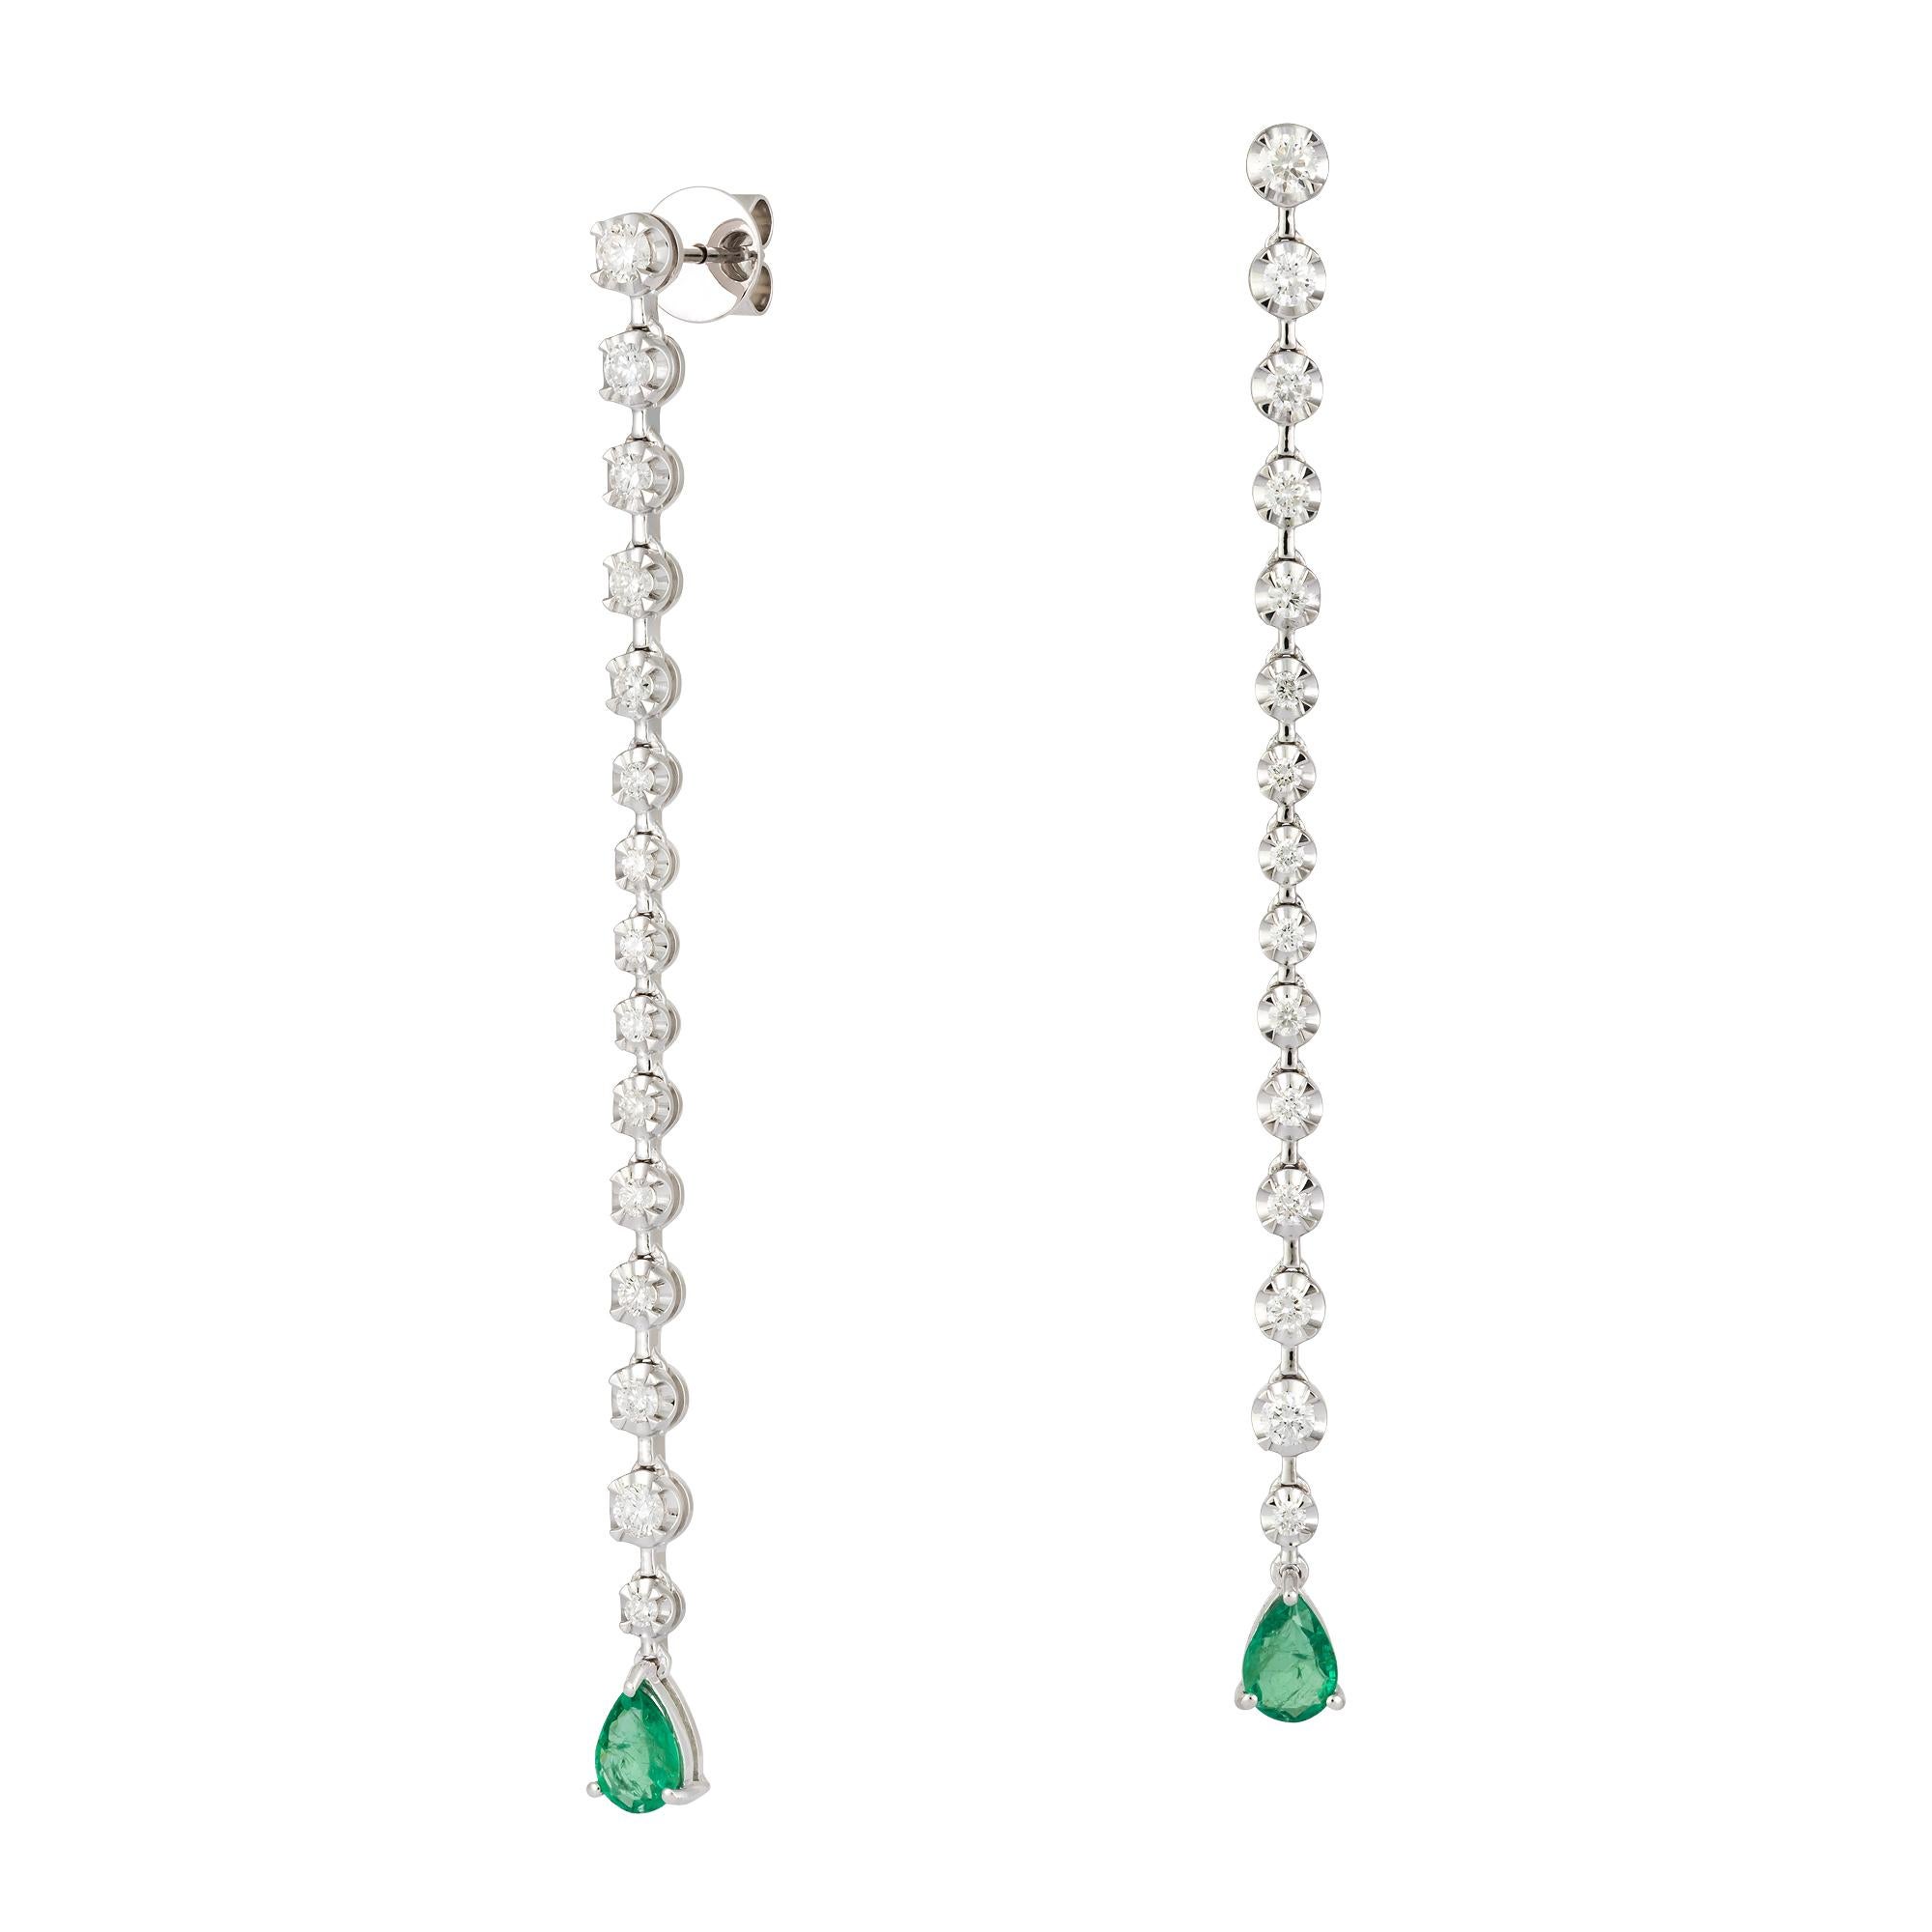 Stunning Dangle White Gold 18K Earrings  Emerald Diamond For Her In New Condition For Sale In Montreux, CH